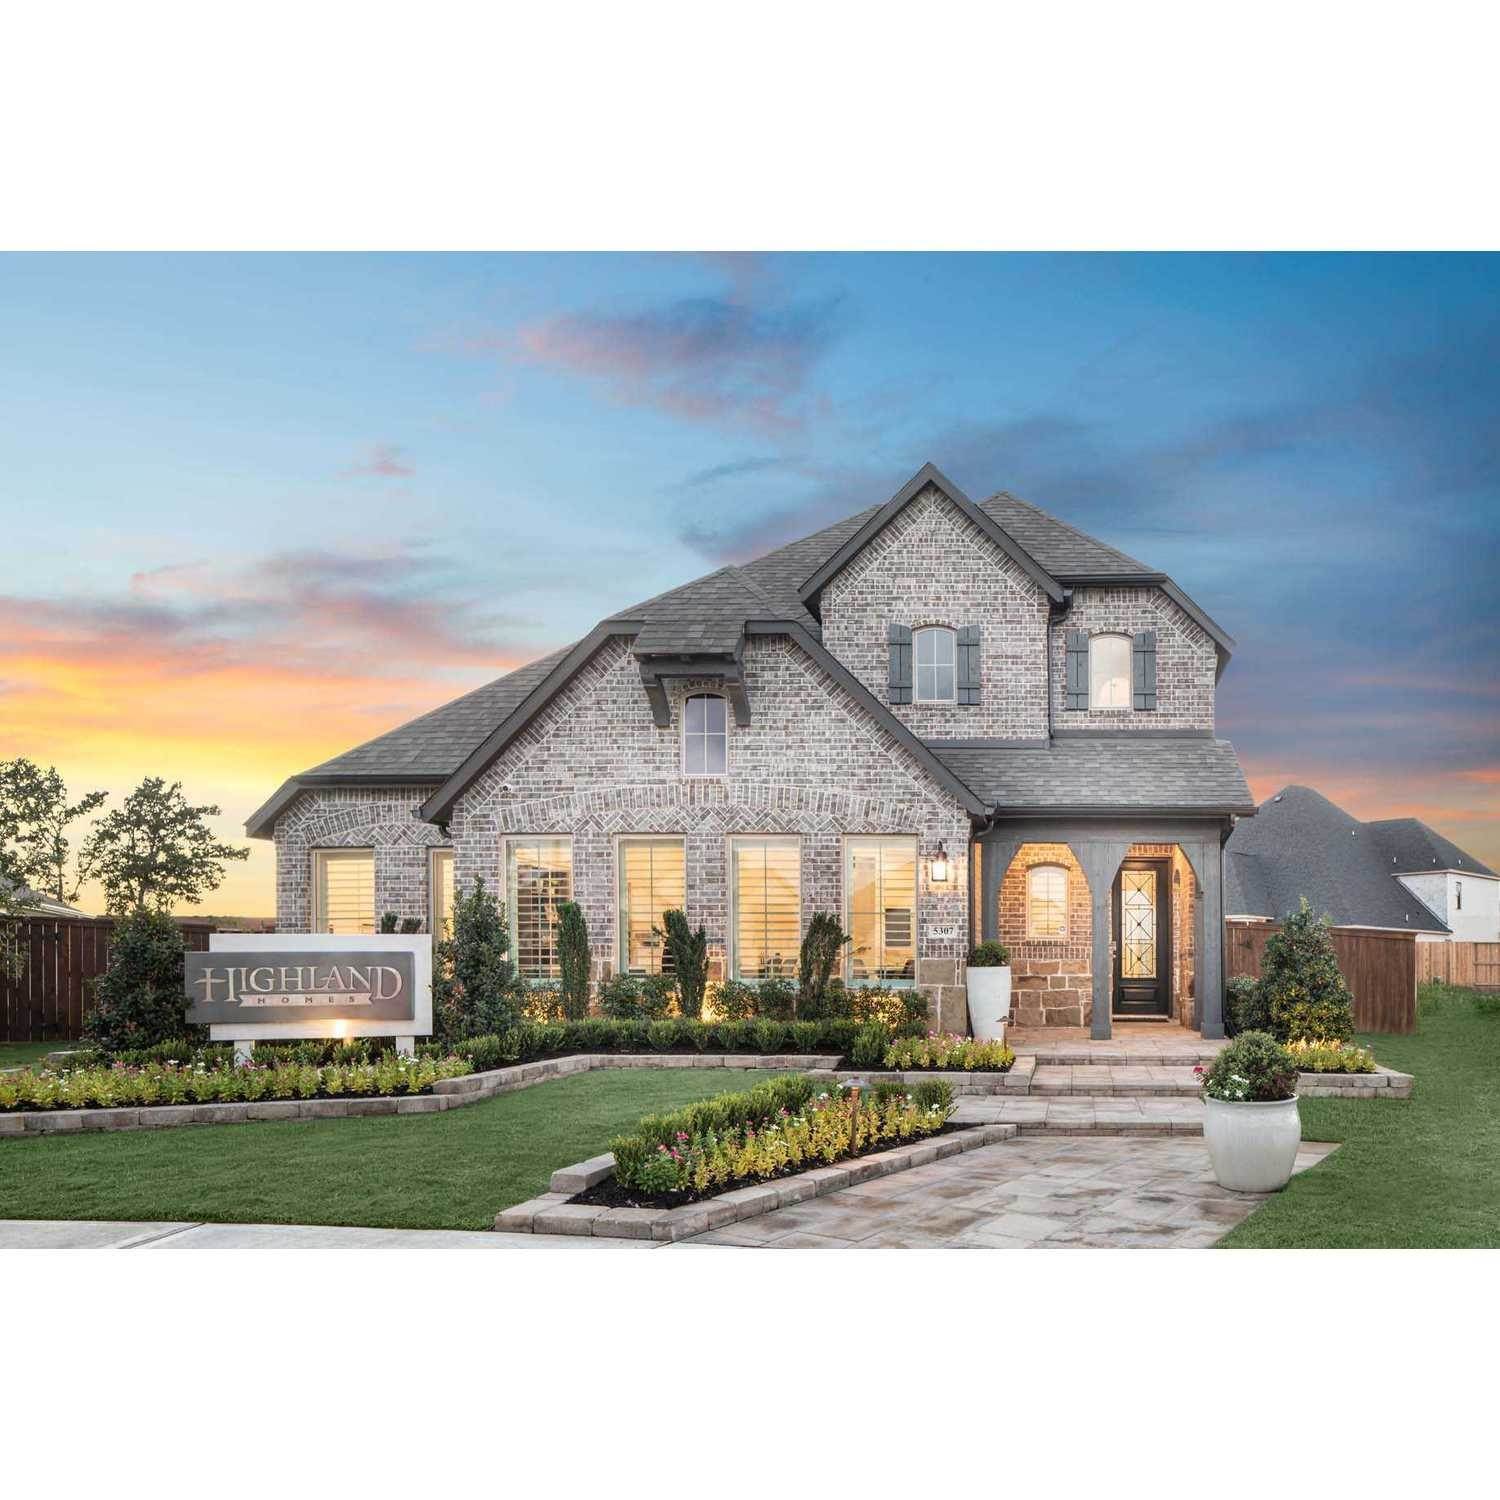 Meridiana 40ft. lots building at 5307 Majestic Court, Manvel, TX 77578